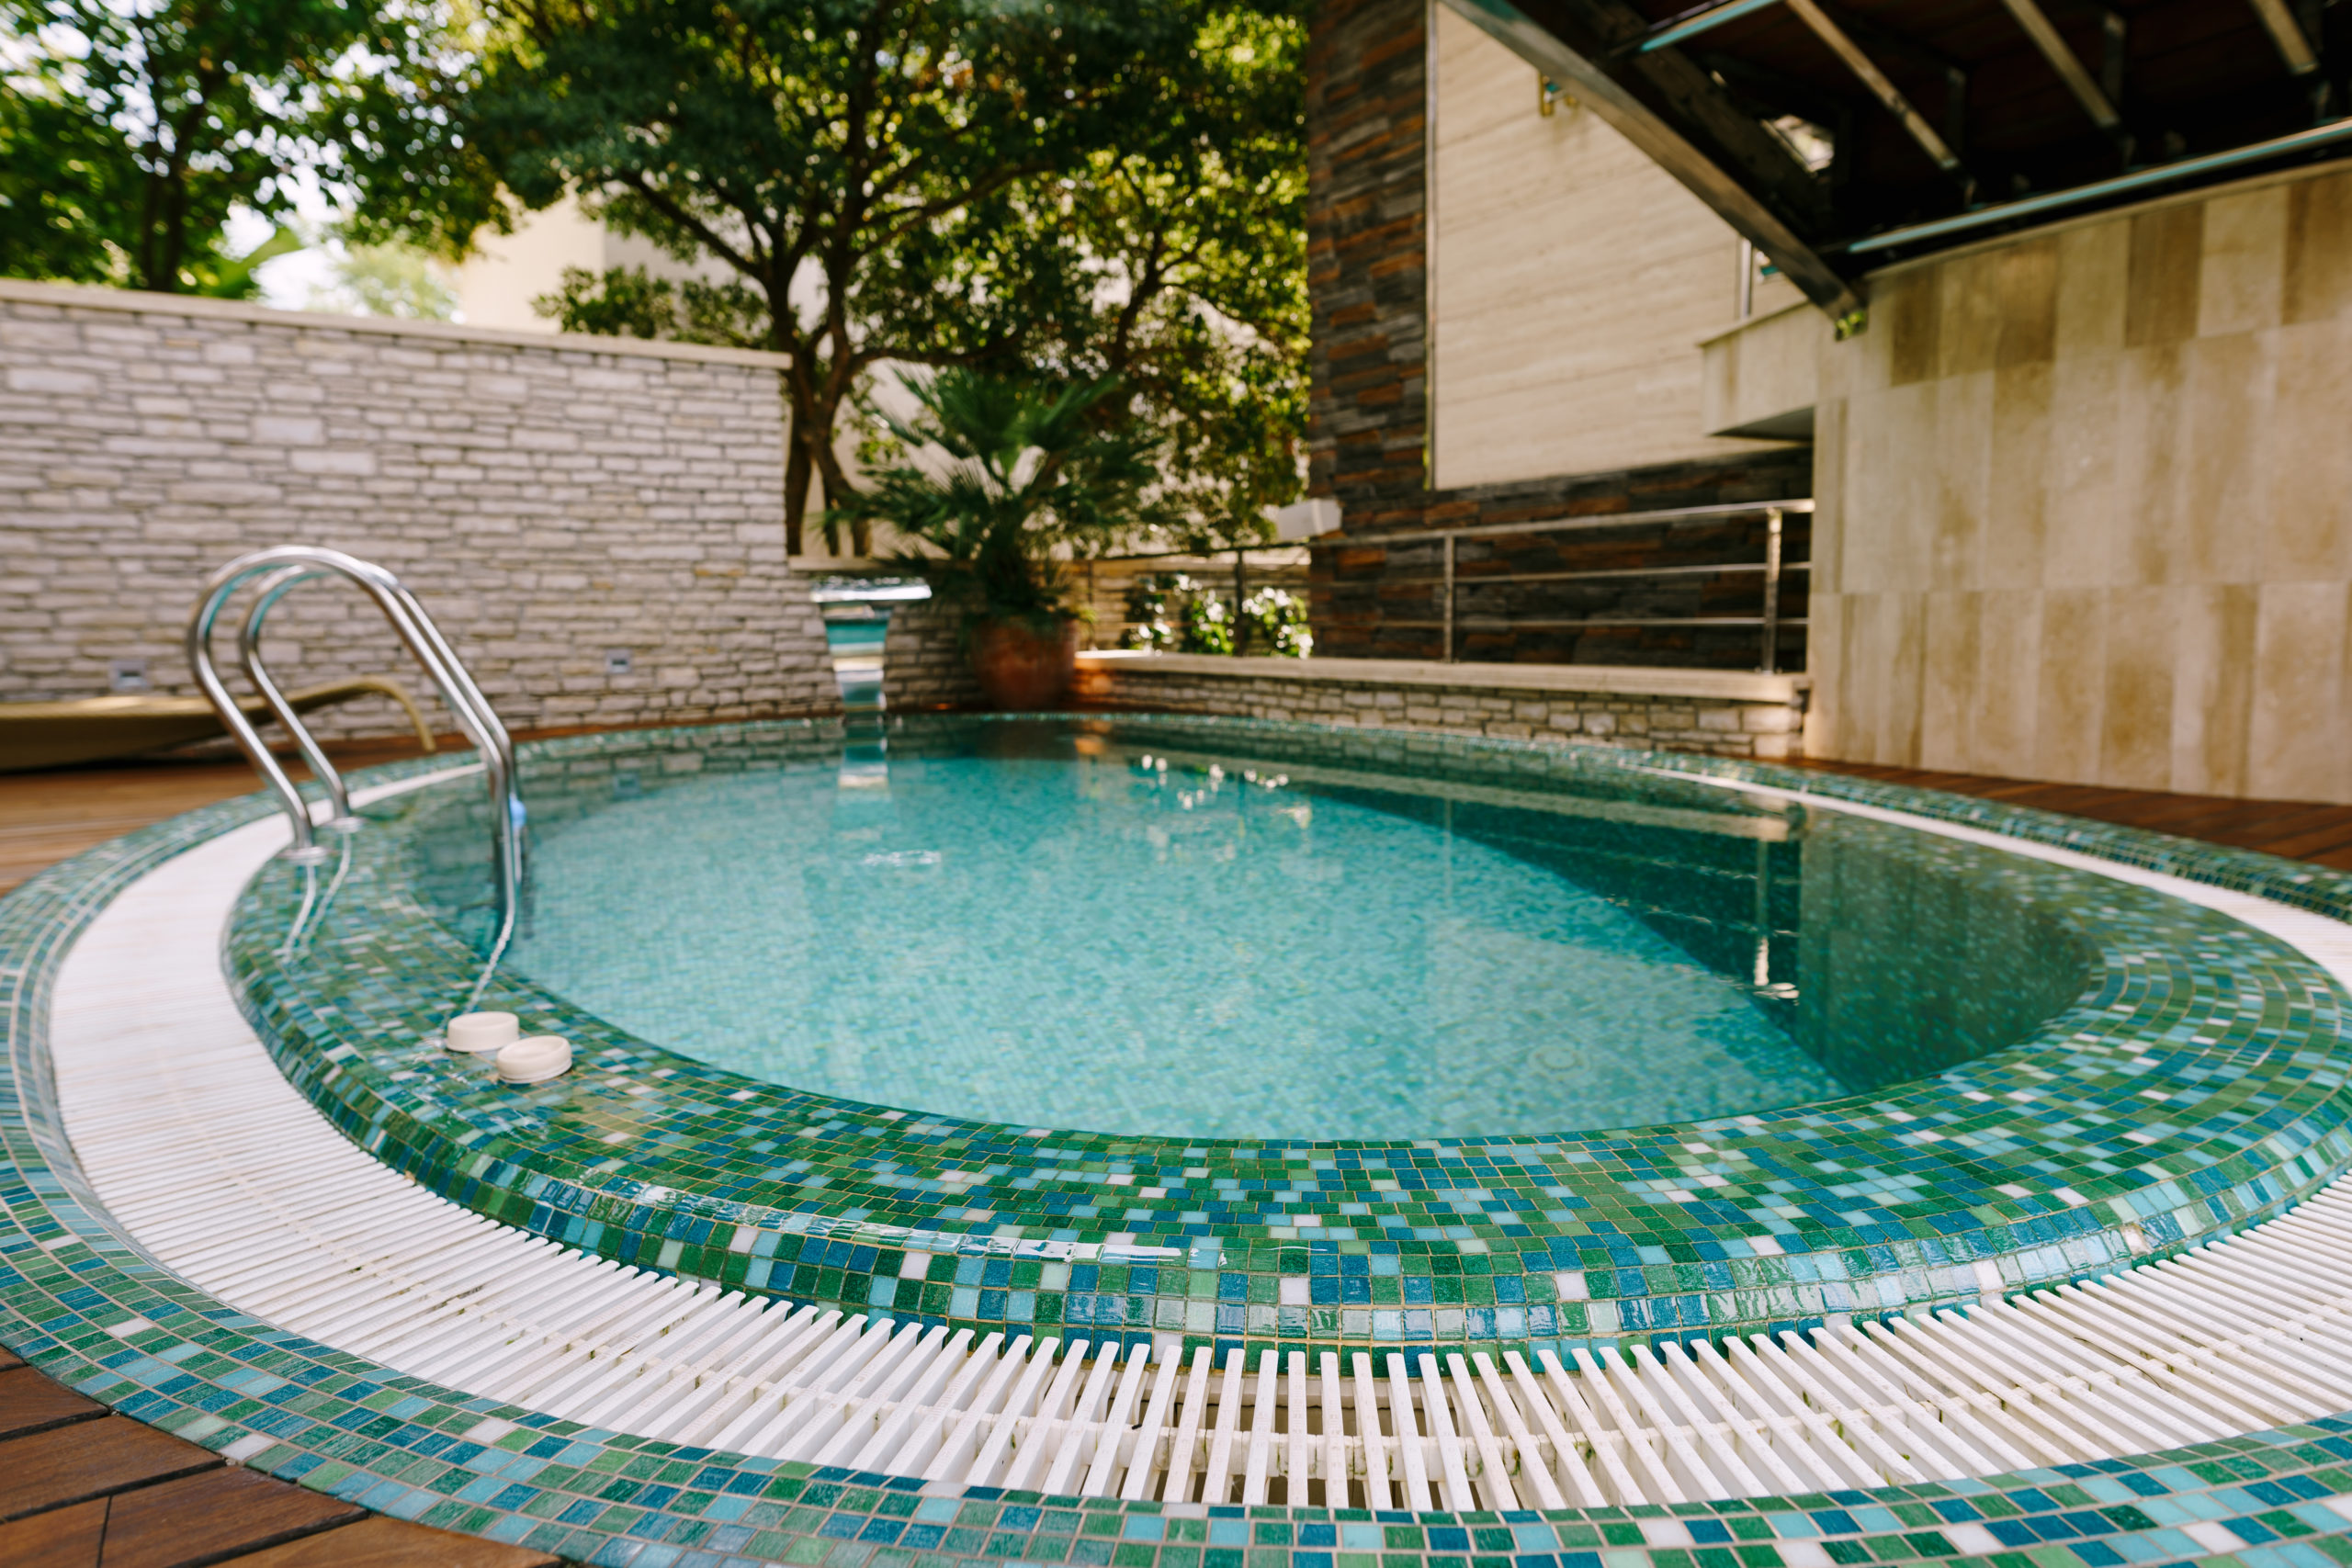 A round pool with green tiles, showcasing a visually appealing and vibrant pool design.